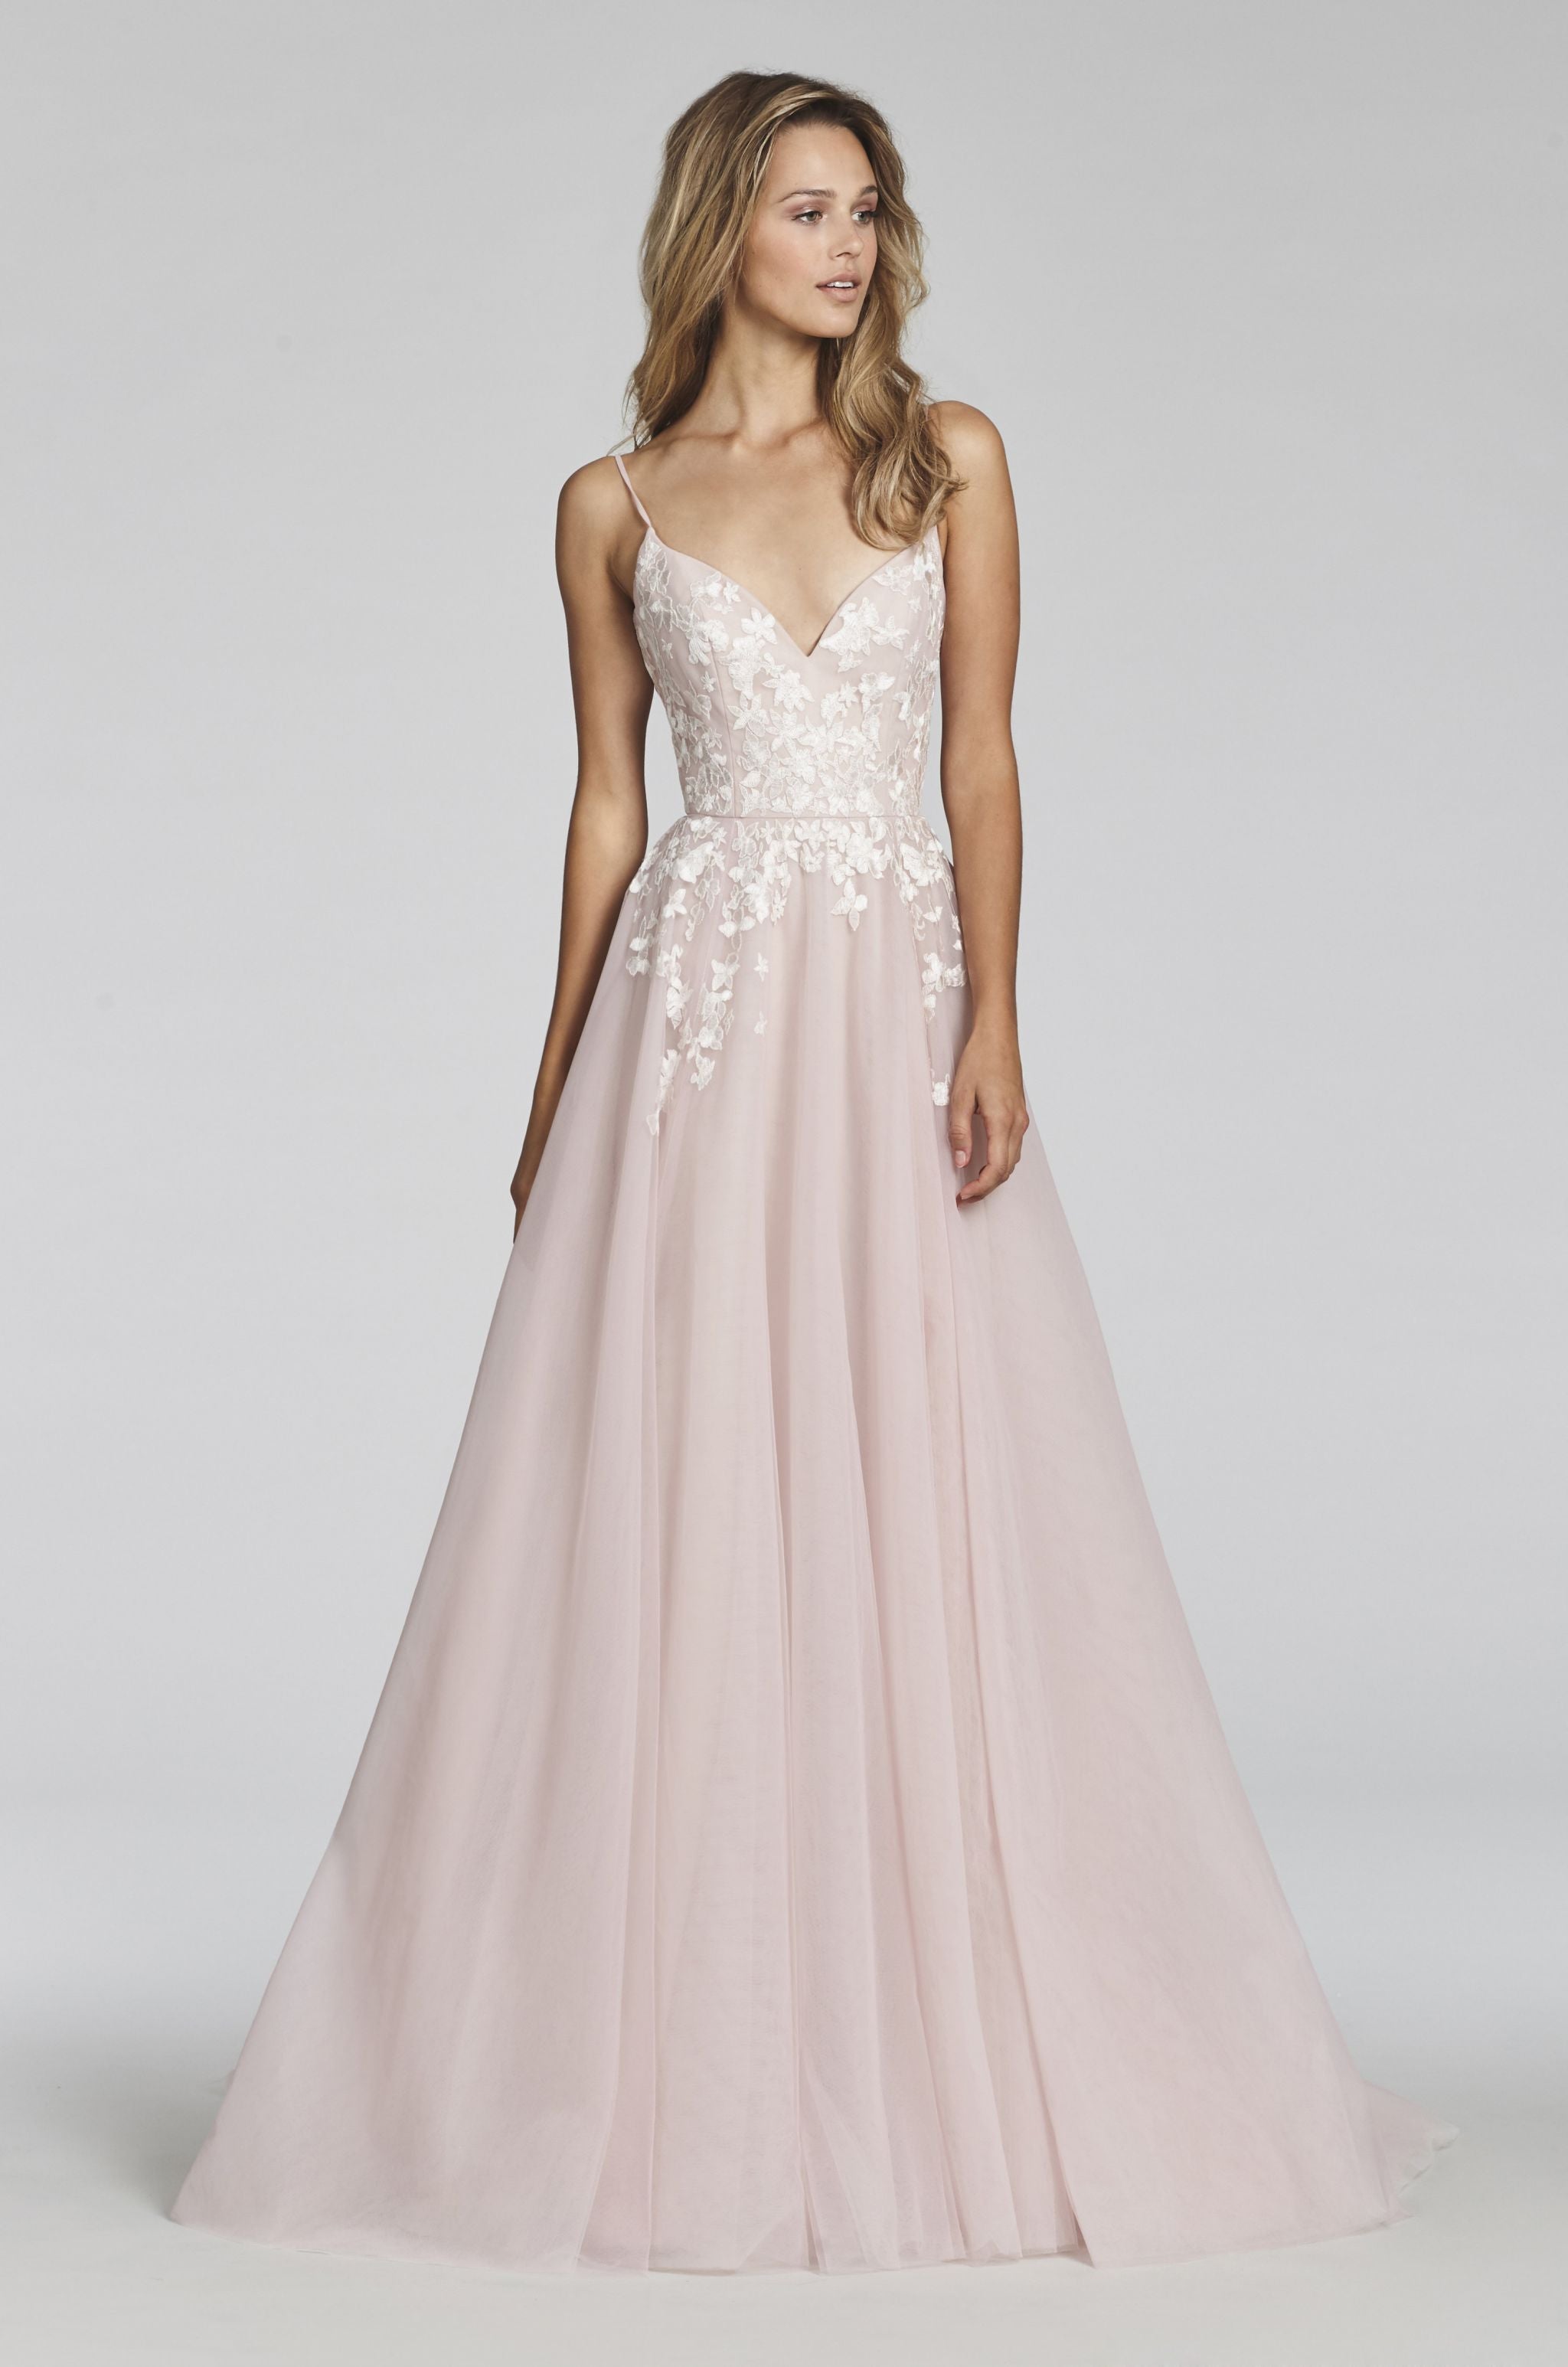 Uncommonly pretty dresses at an honest price. | Vow'd Weddings